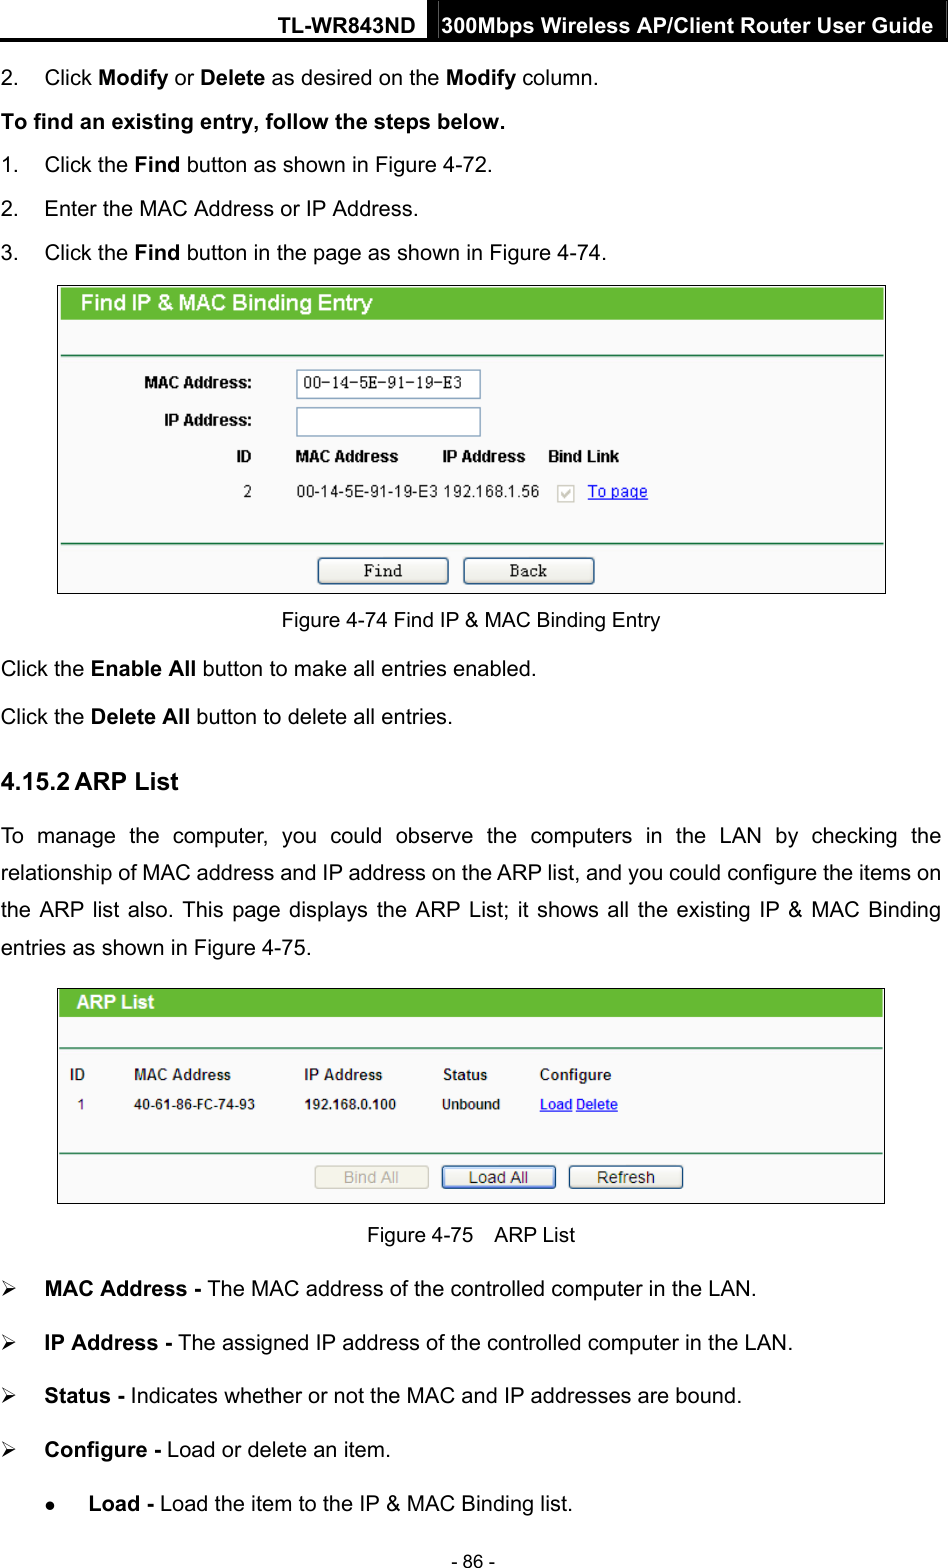 TL-WR843ND 300Mbps Wireless AP/Client Router User Guide - 86 - 2. Click Modify or Delete as desired on the Modify column.   To find an existing entry, follow the steps below. 1. Click the Find button as shown in Figure 4-72. 2.  Enter the MAC Address or IP Address. 3. Click the Find button in the page as shown in Figure 4-74.  Figure 4-74 Find IP &amp; MAC Binding Entry Click the Enable All button to make all entries enabled. Click the Delete All button to delete all entries. 4.15.2 ARP List To manage the computer, you could observe the computers in the LAN by checking the relationship of MAC address and IP address on the ARP list, and you could configure the items on the ARP list also. This page displays the ARP List; it shows all the existing IP &amp; MAC Binding entries as shown in Figure 4-75.    Figure 4-75  ARP List  MAC Address - The MAC address of the controlled computer in the LAN.    IP Address - The assigned IP address of the controlled computer in the LAN.    Status - Indicates whether or not the MAC and IP addresses are bound.  Configure - Load or delete an item.    Load - Load the item to the IP &amp; MAC Binding list.   